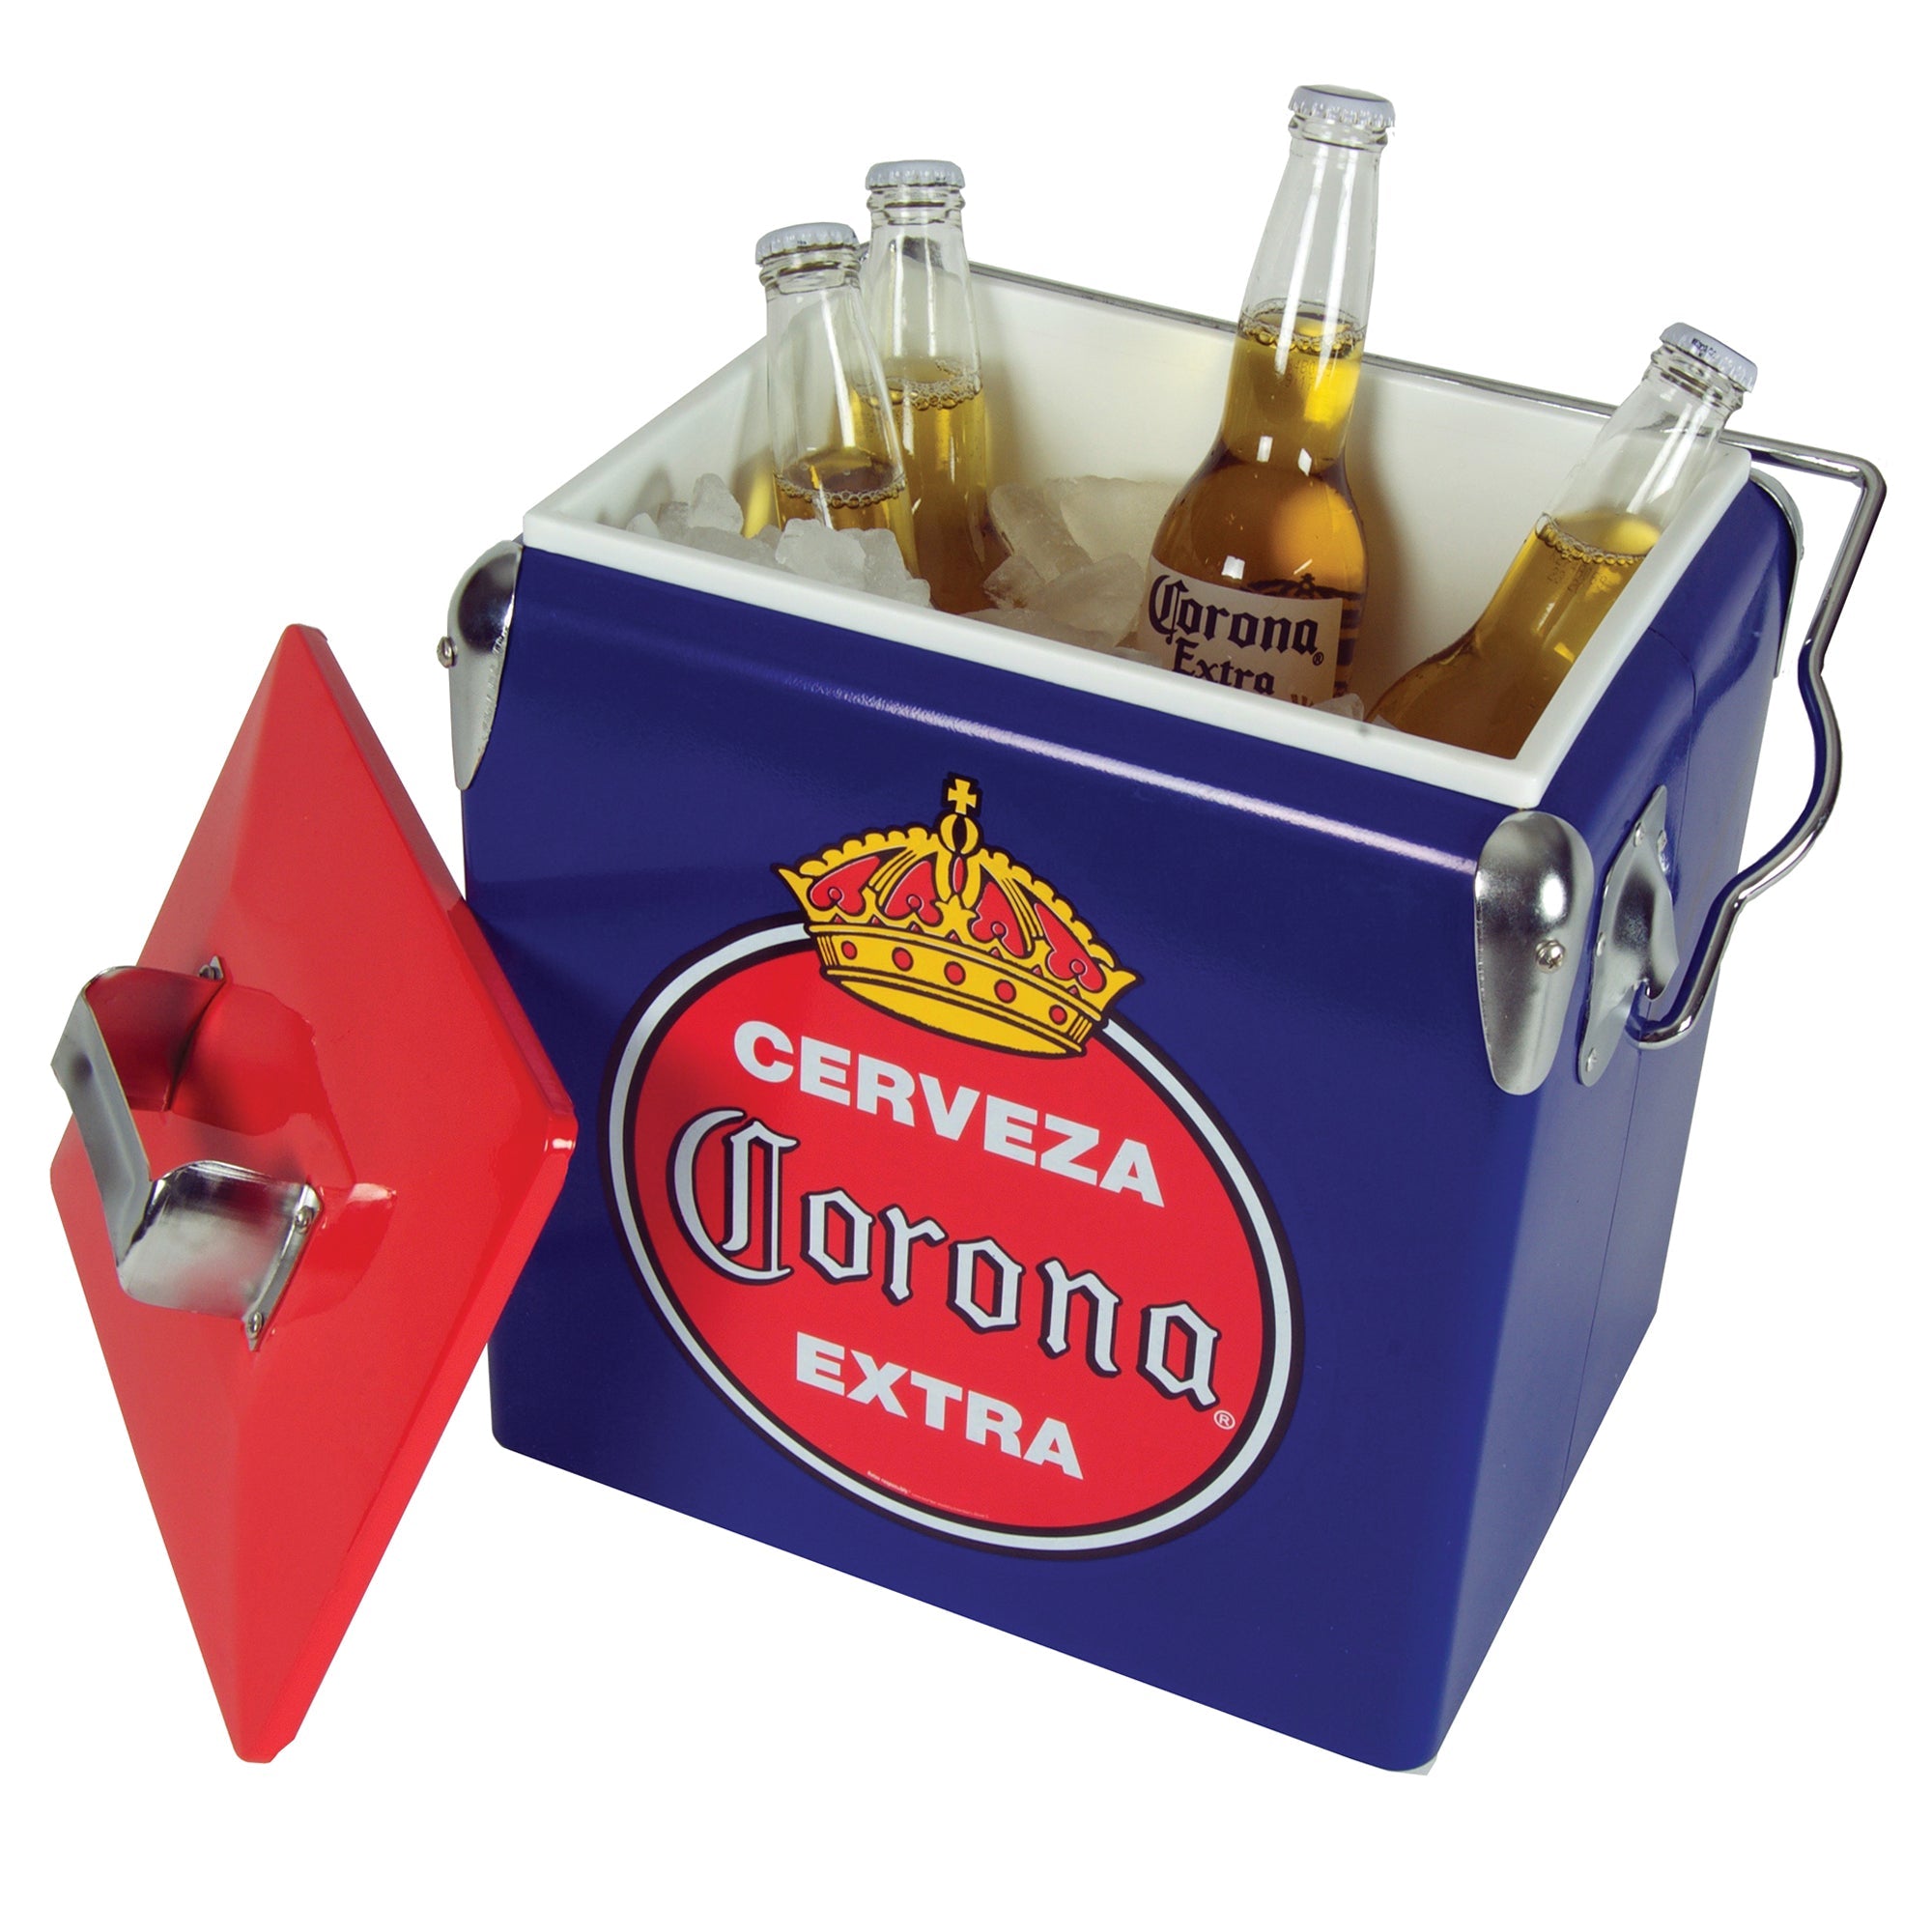 Product shot of Corona retro ice chest, open with ice and bottles of Corona beer inside and the lid leaning against it, on a white background